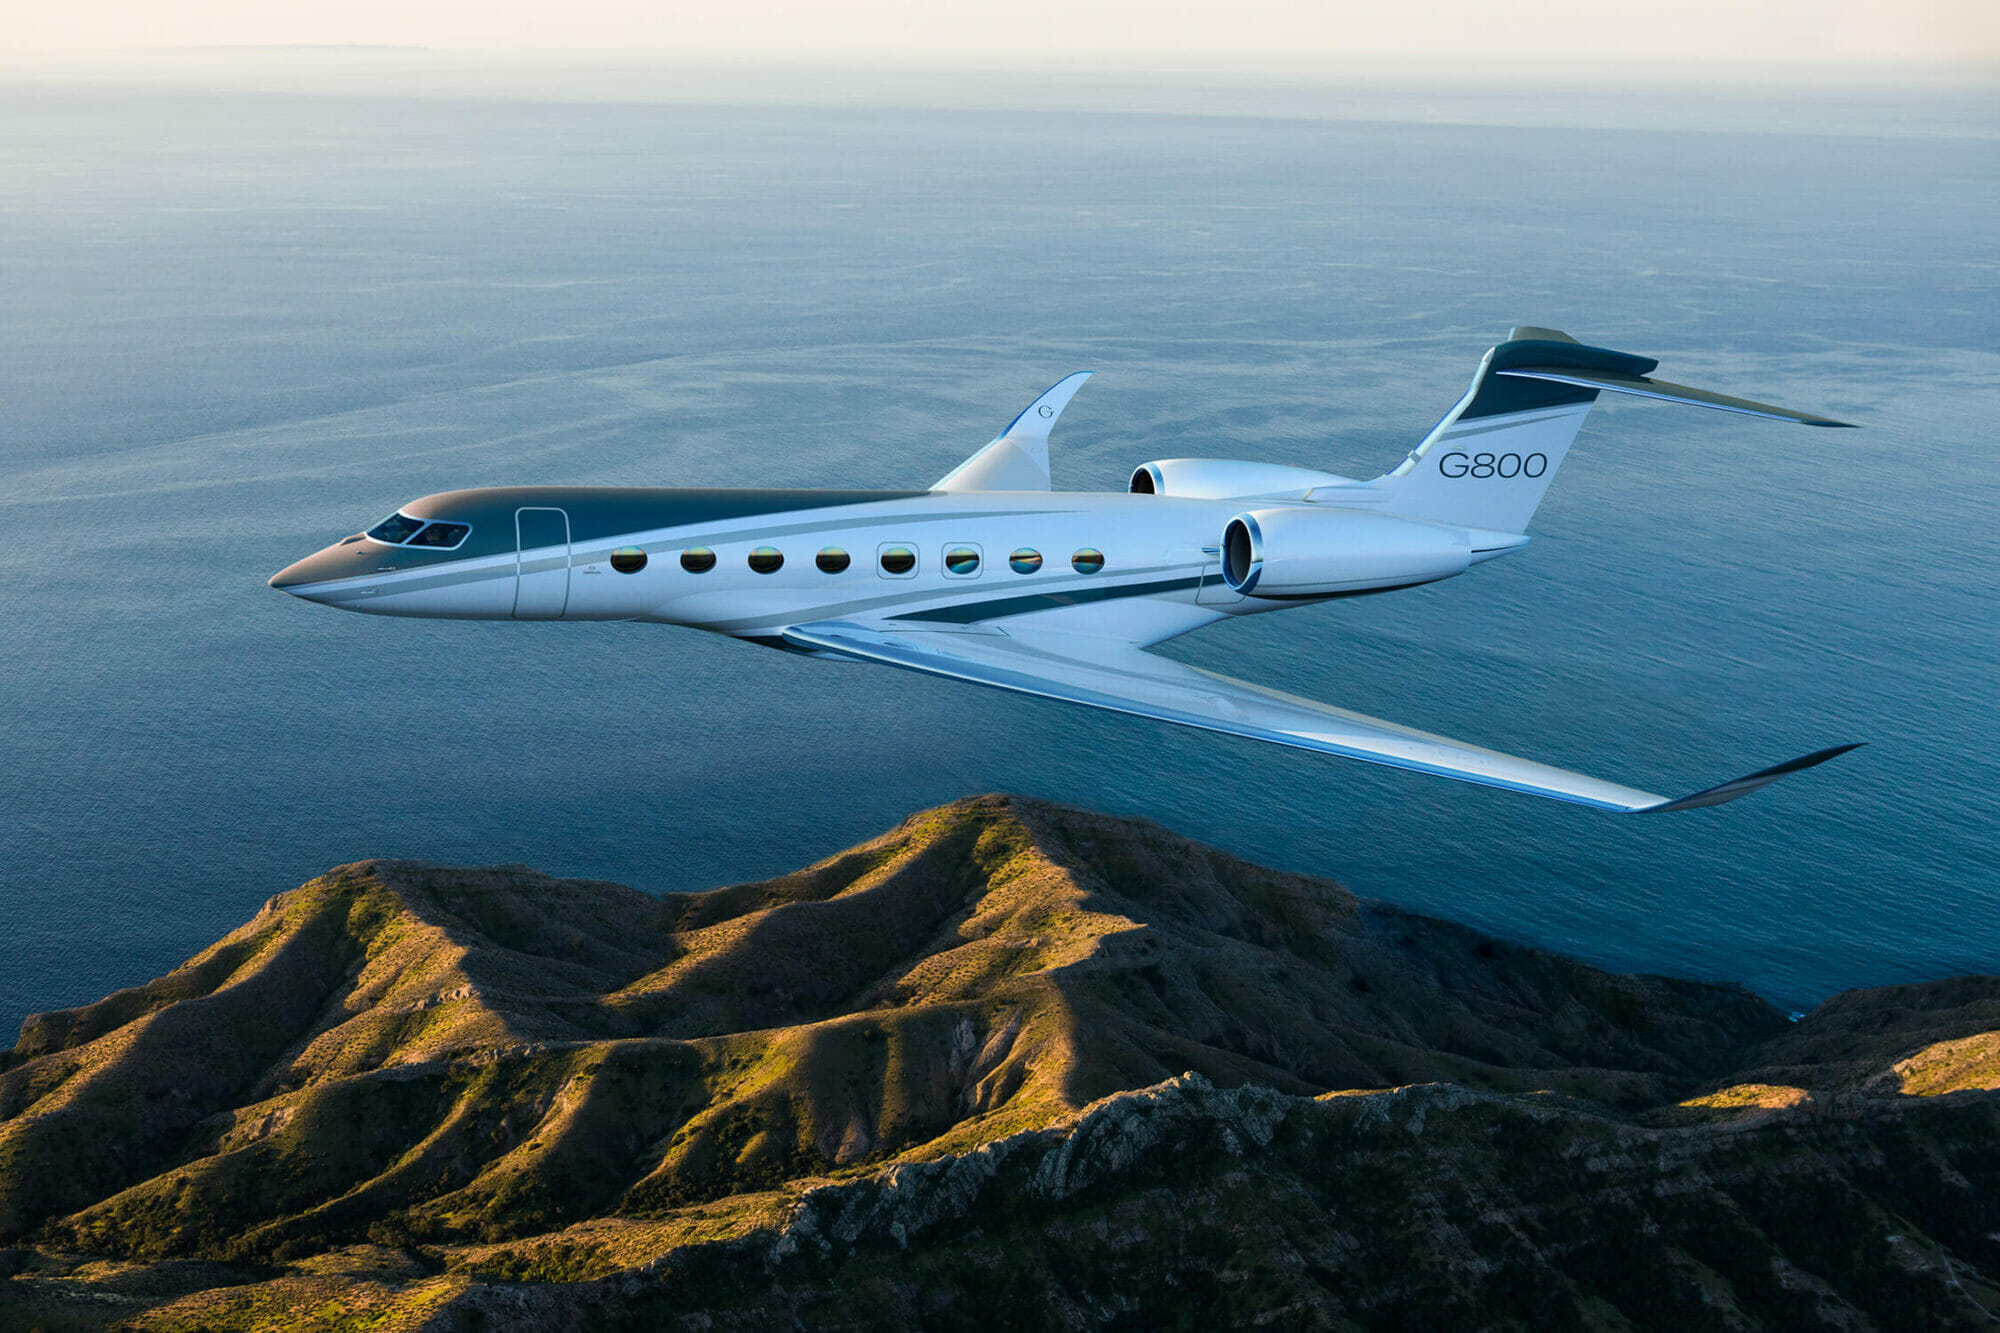 Gulfstream G800 exterior aerial shot cruising above mountains and water